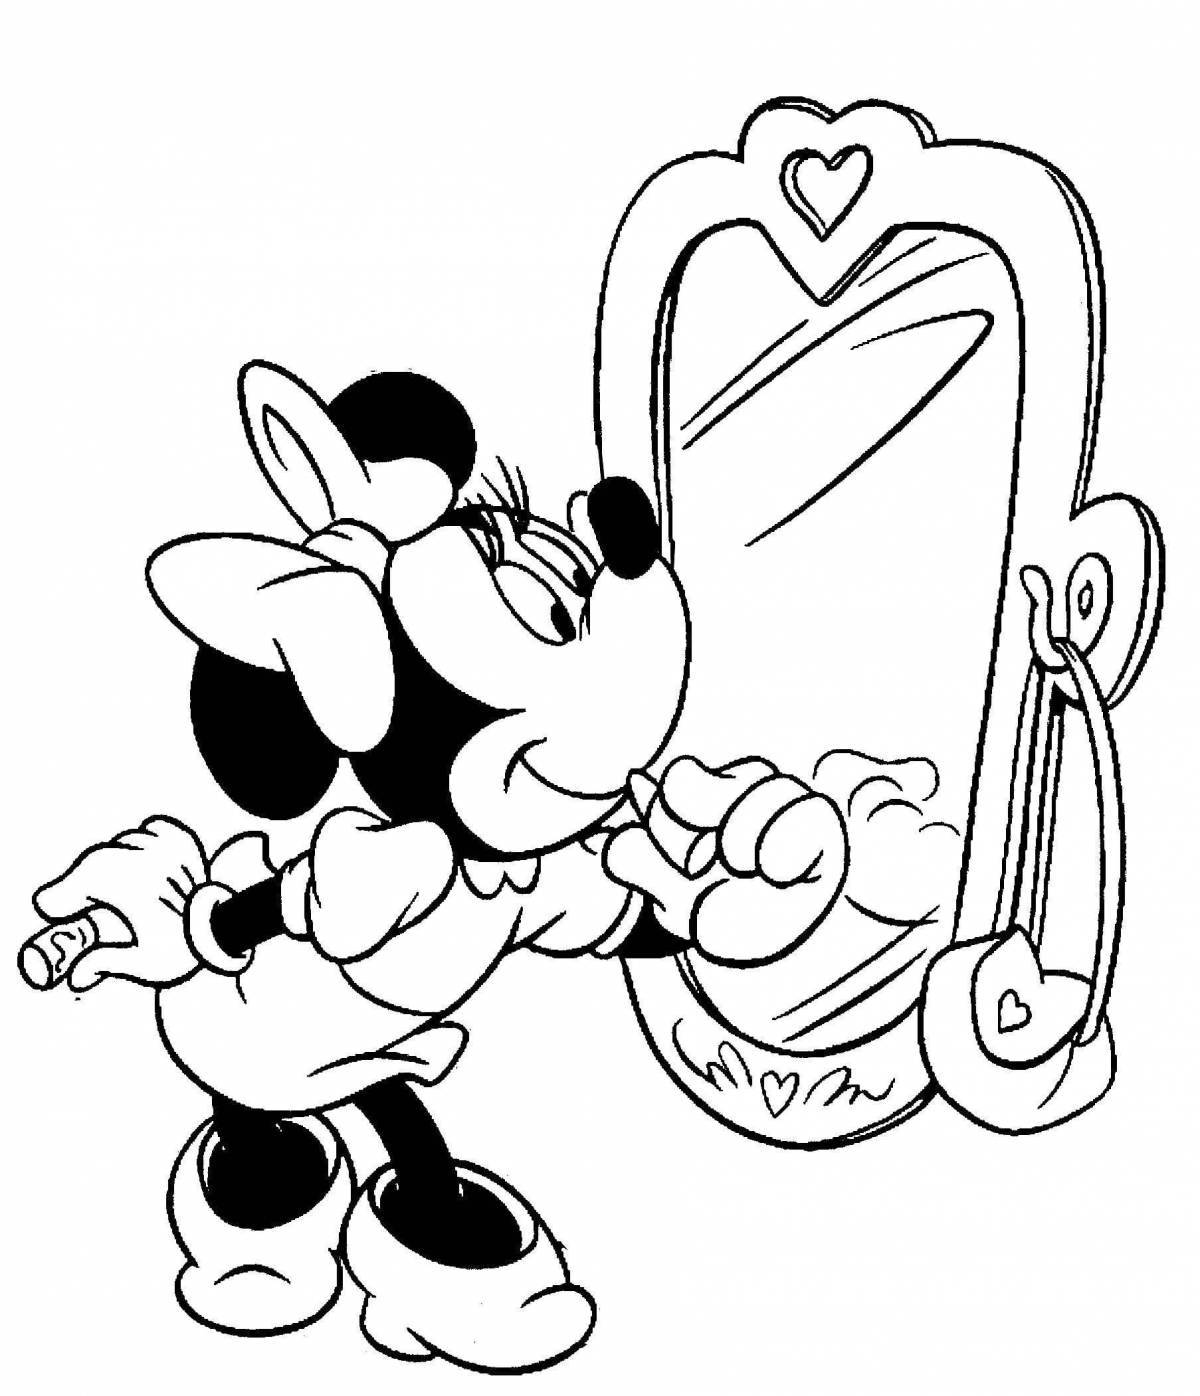 Cute mickey mouse coloring page